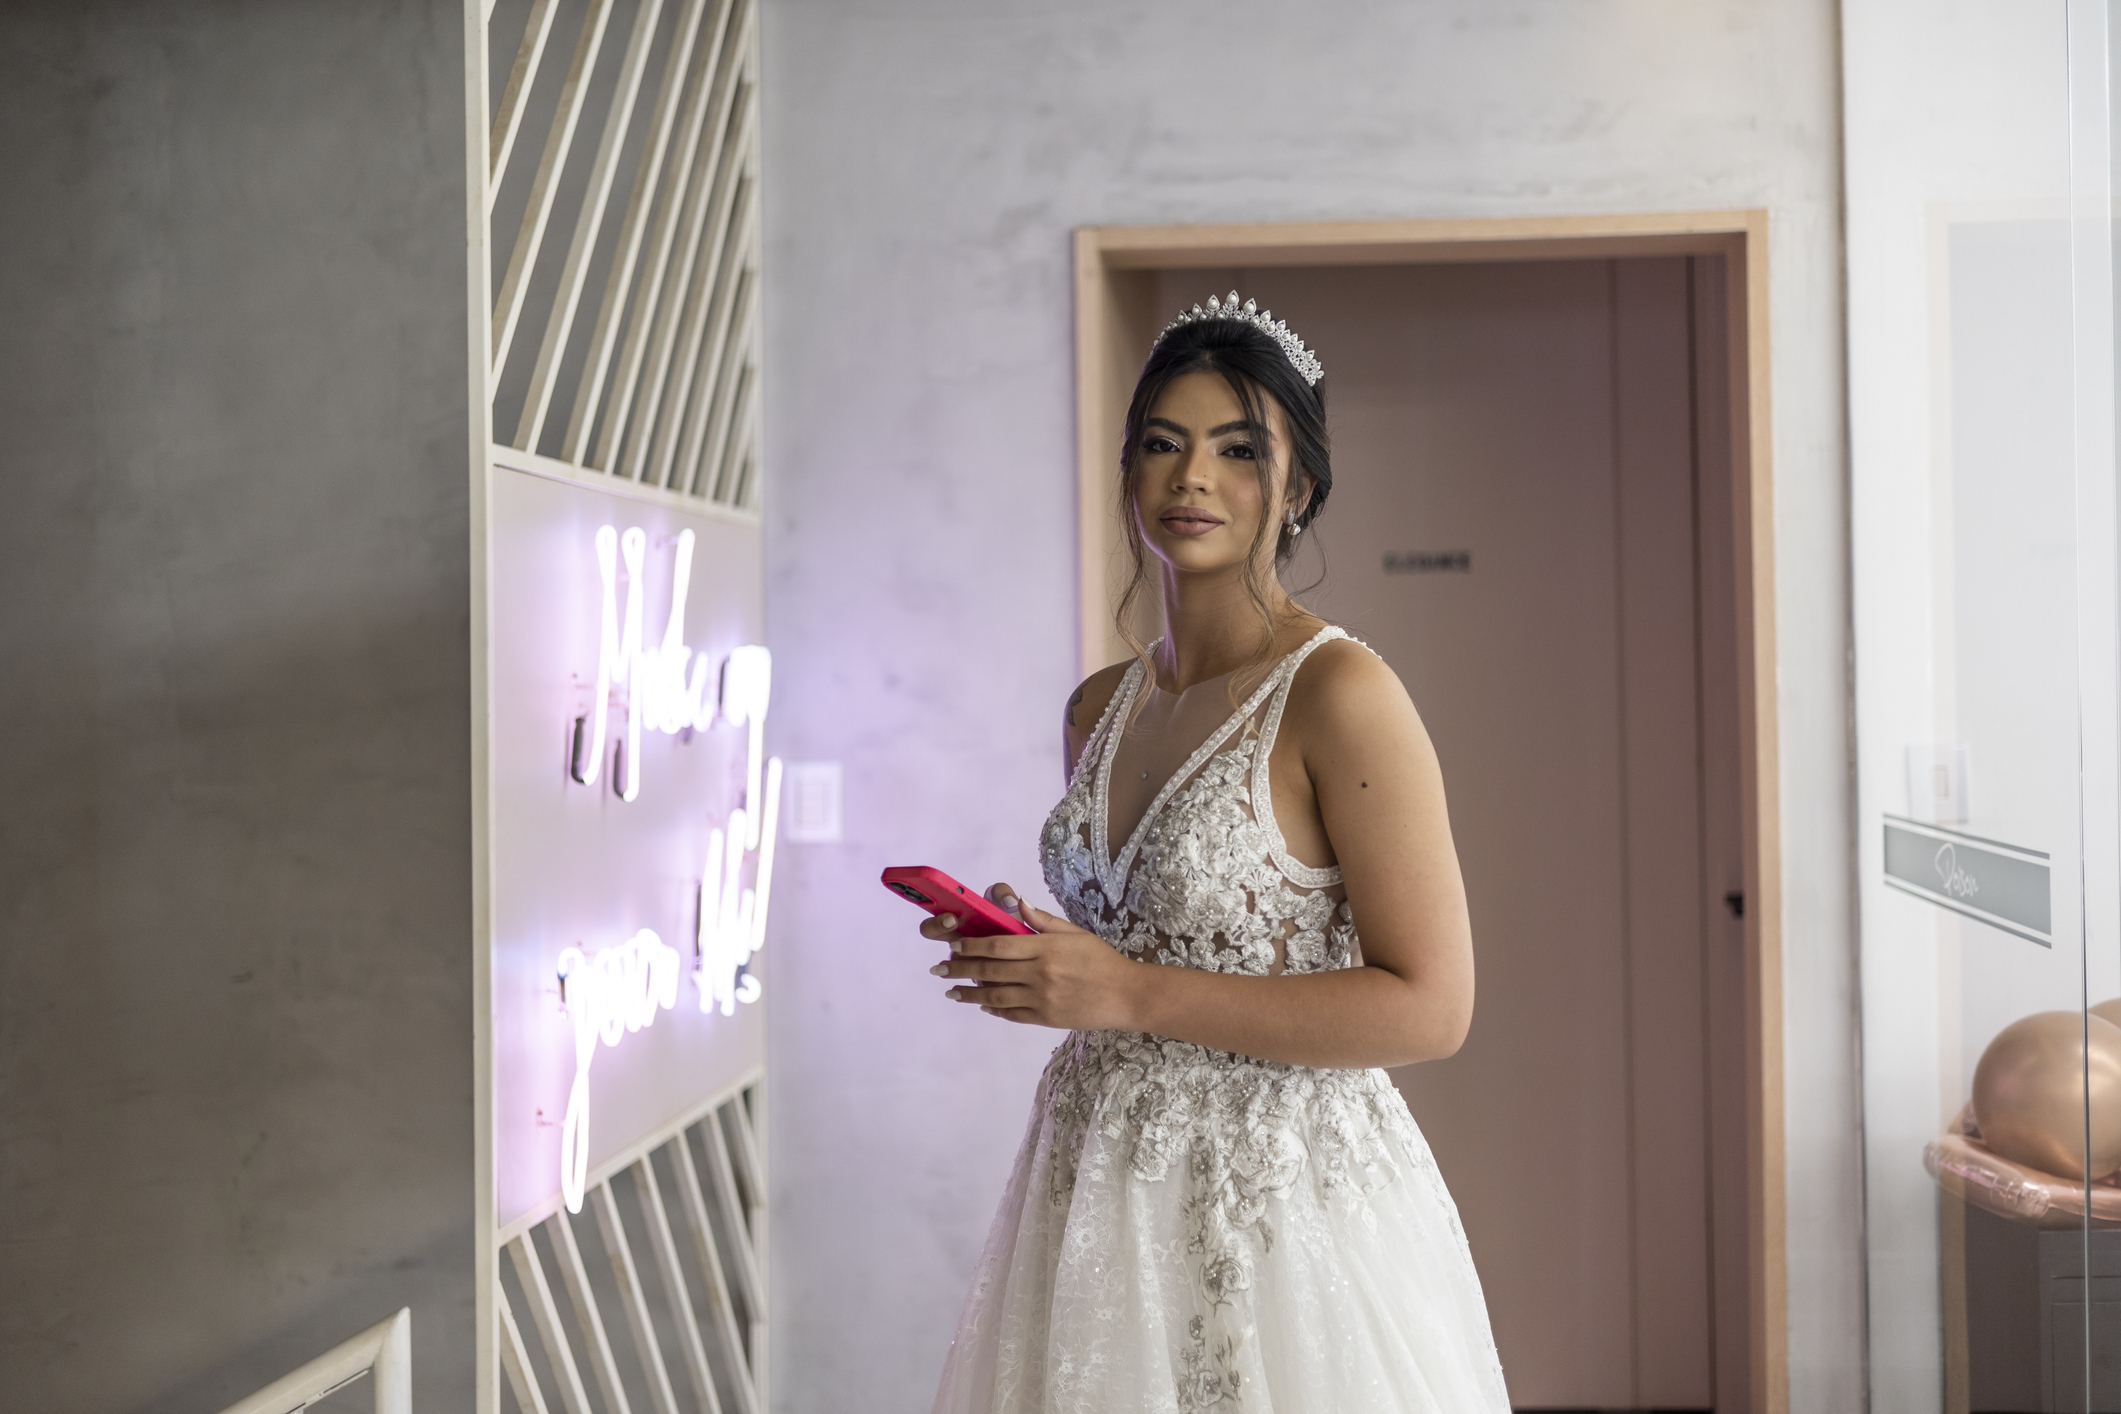 Woman in wedding dress holding phone, standing beside neon sign